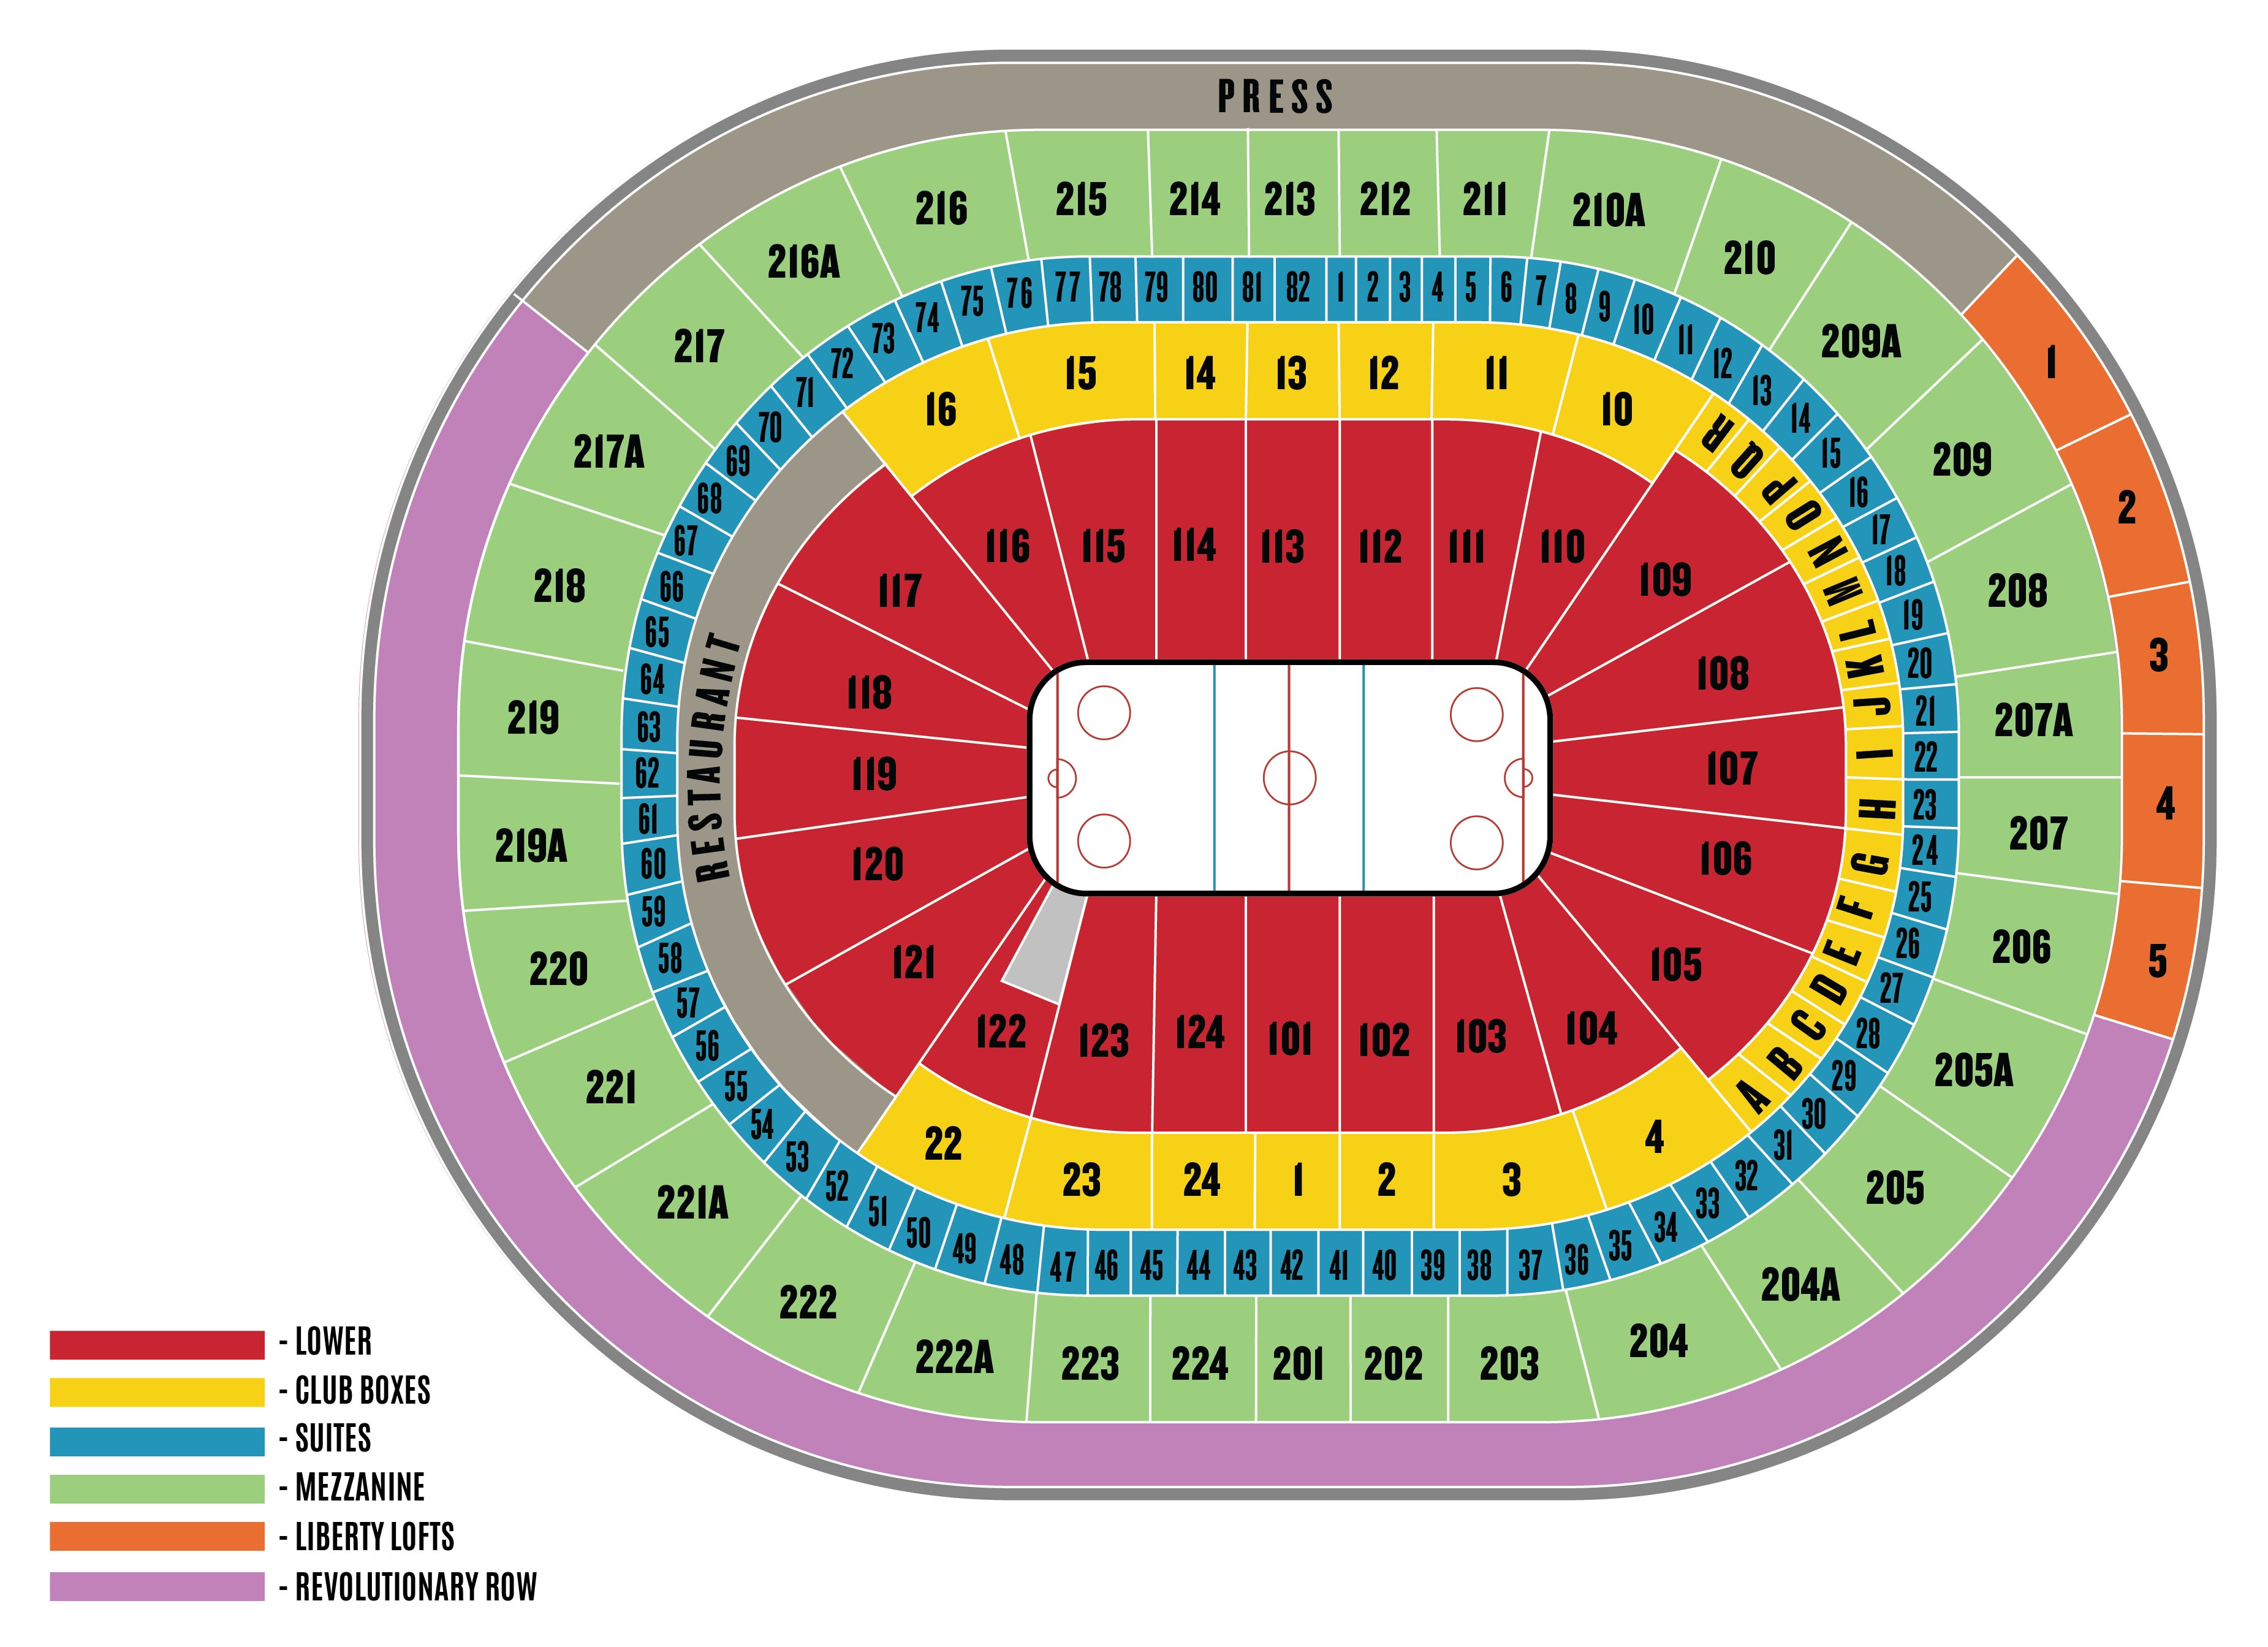 Wells Fargo Center Philadelphia Seating Chart With Seat Numbers Bios Pics